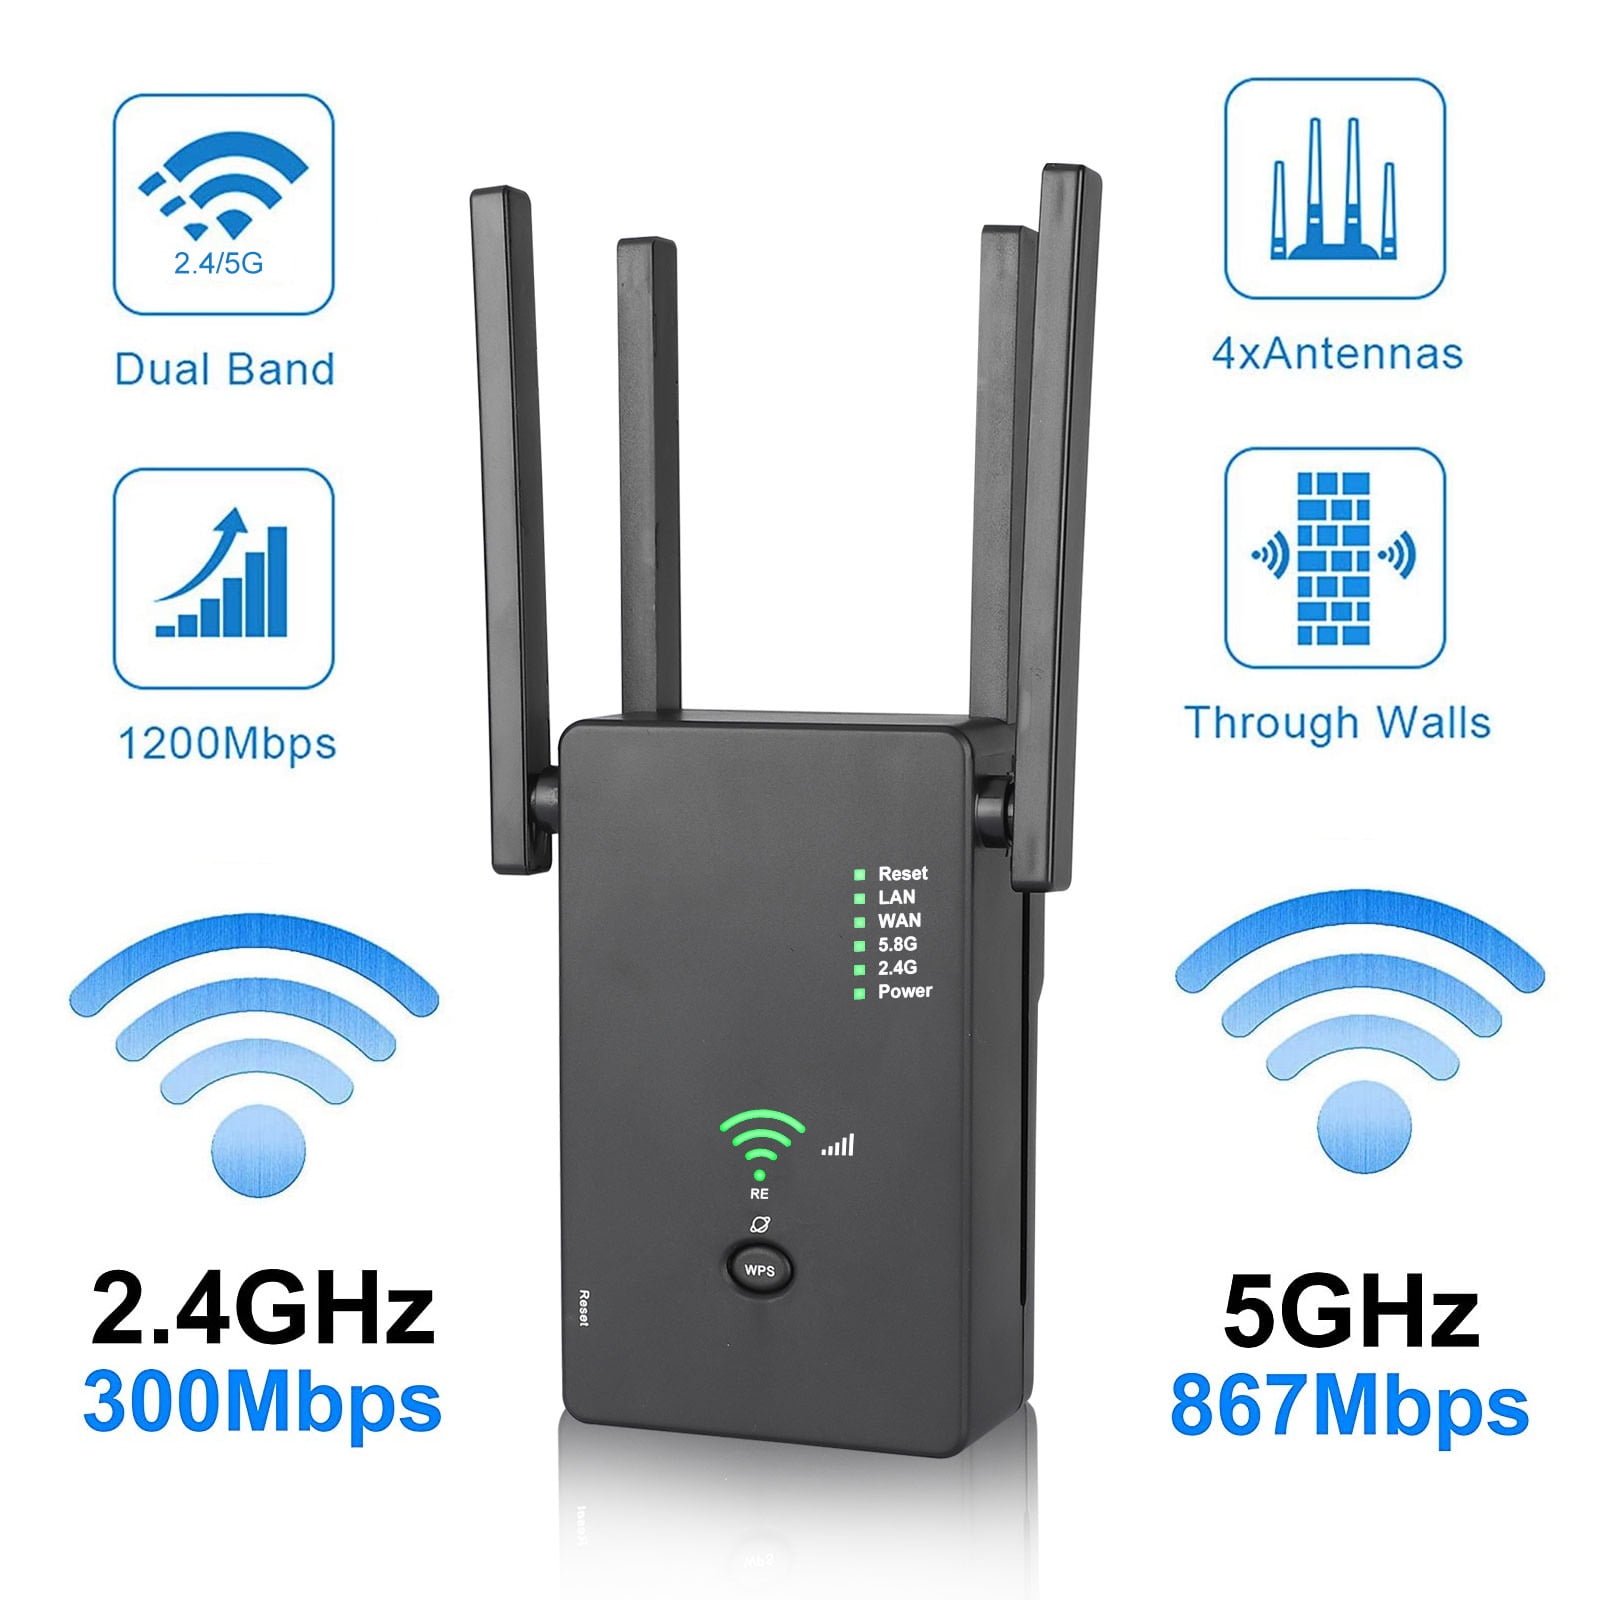 【Newest 2020】 Wireless WiFi Range Extender with 5GHz & 2.4GHz Dual Band Up to 1200Mbps High Speed WiFi Signal Booster Ideal for Home Office Gaming & HD Video Streaming Works Great with Any Routers 